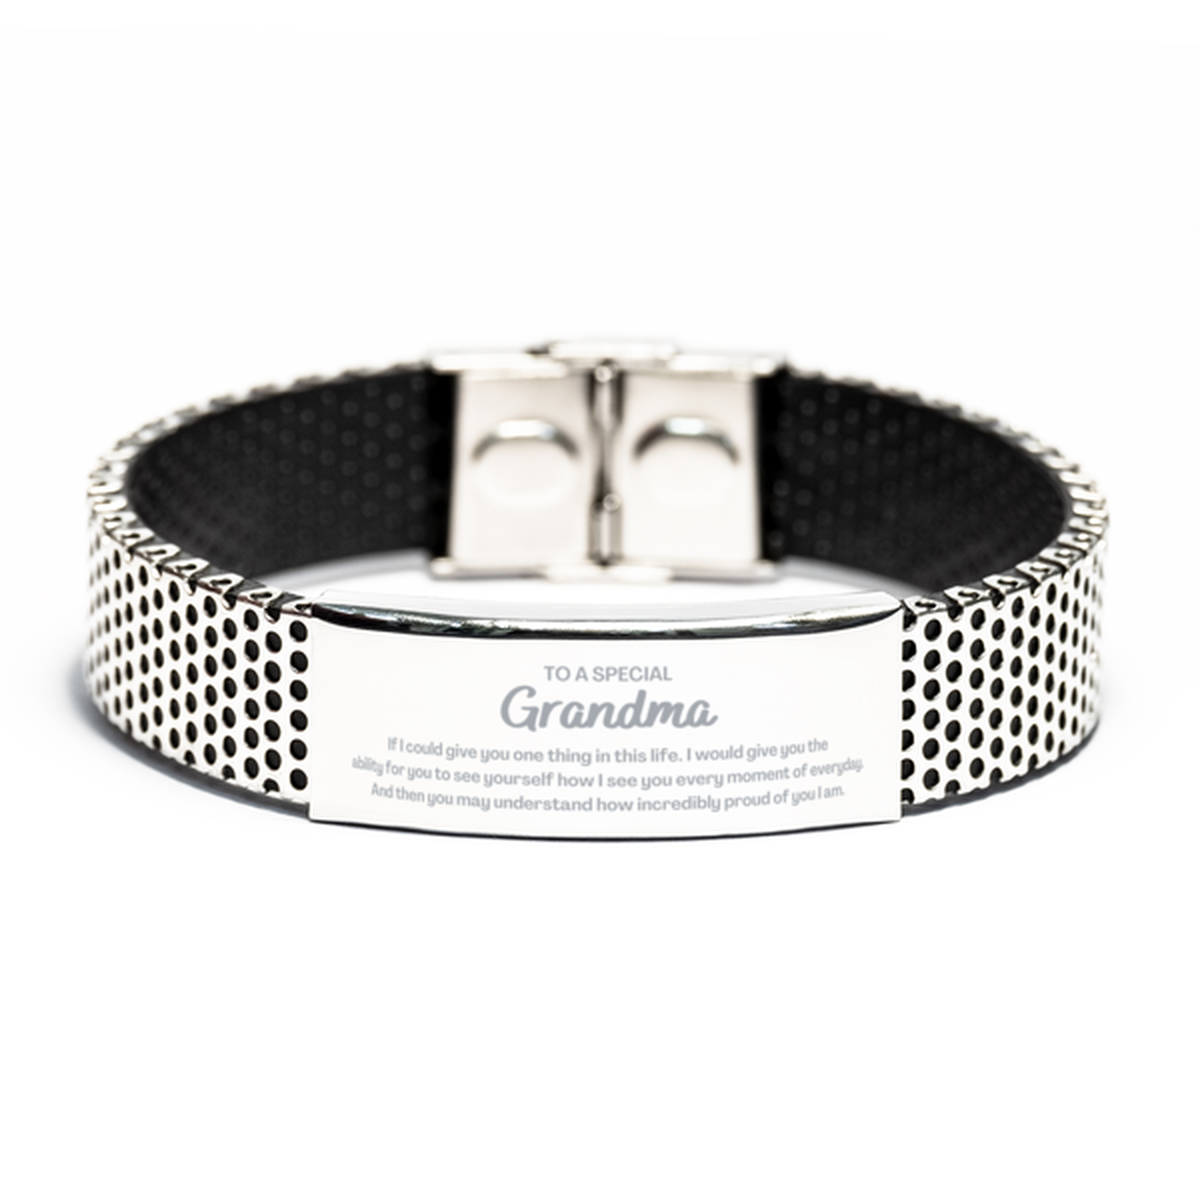 To My Grandma Stainless Steel Bracelet, Gifts For Grandma Engraved, Inspirational Gifts for Christmas Birthday, Epic Gifts for Grandma To A Special Grandma how incredibly proud of you I am